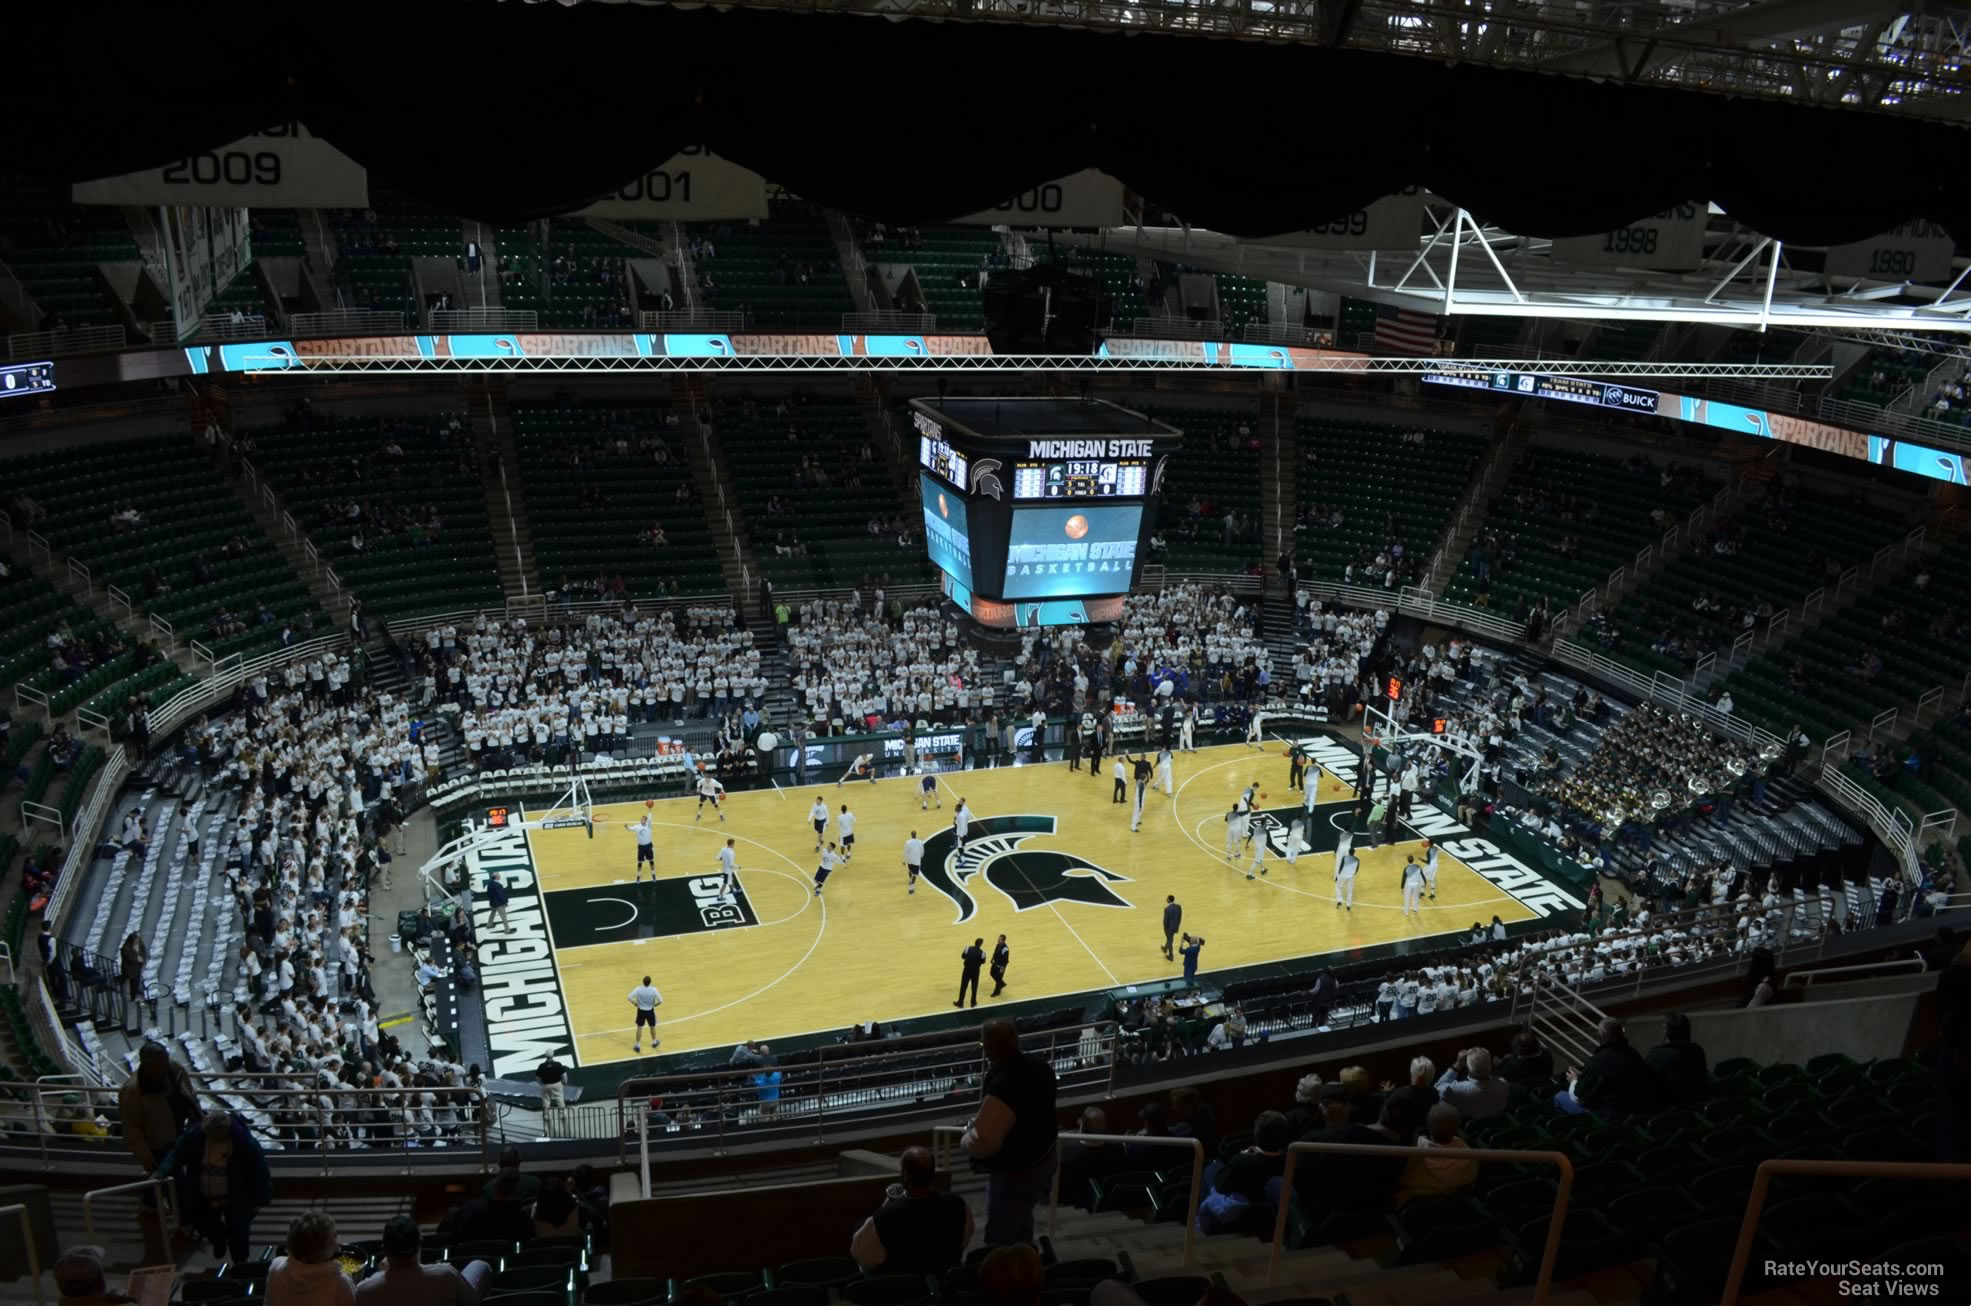 section 229, row 15 seat view  - breslin center